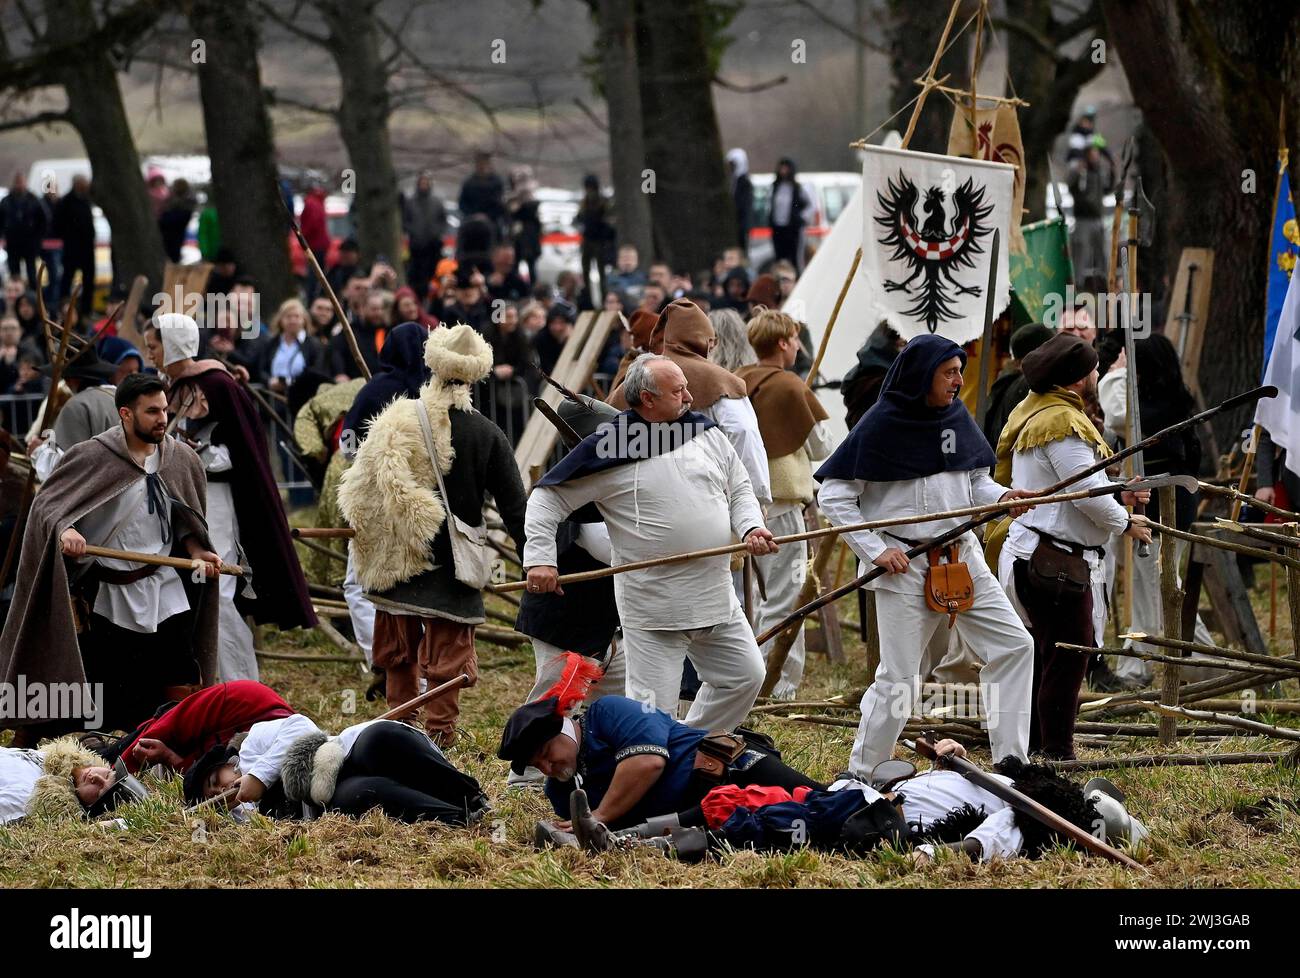 Donja Stubica, Croatia, 100224. Reconstruction of the historical battle between the serfs led by Matija Gubec and the army of the Hungarian-Croatian nobleman Ferenc Franjo Tahi from 1573, which marks the 451st anniversary of the Peasants Revolt in Donja Stubica. Photo: Ronald Gorsic / CROPIX Copyright: xxRonaldxGorsicx/xCROPIXx seljacka buna38-100224 Stock Photo